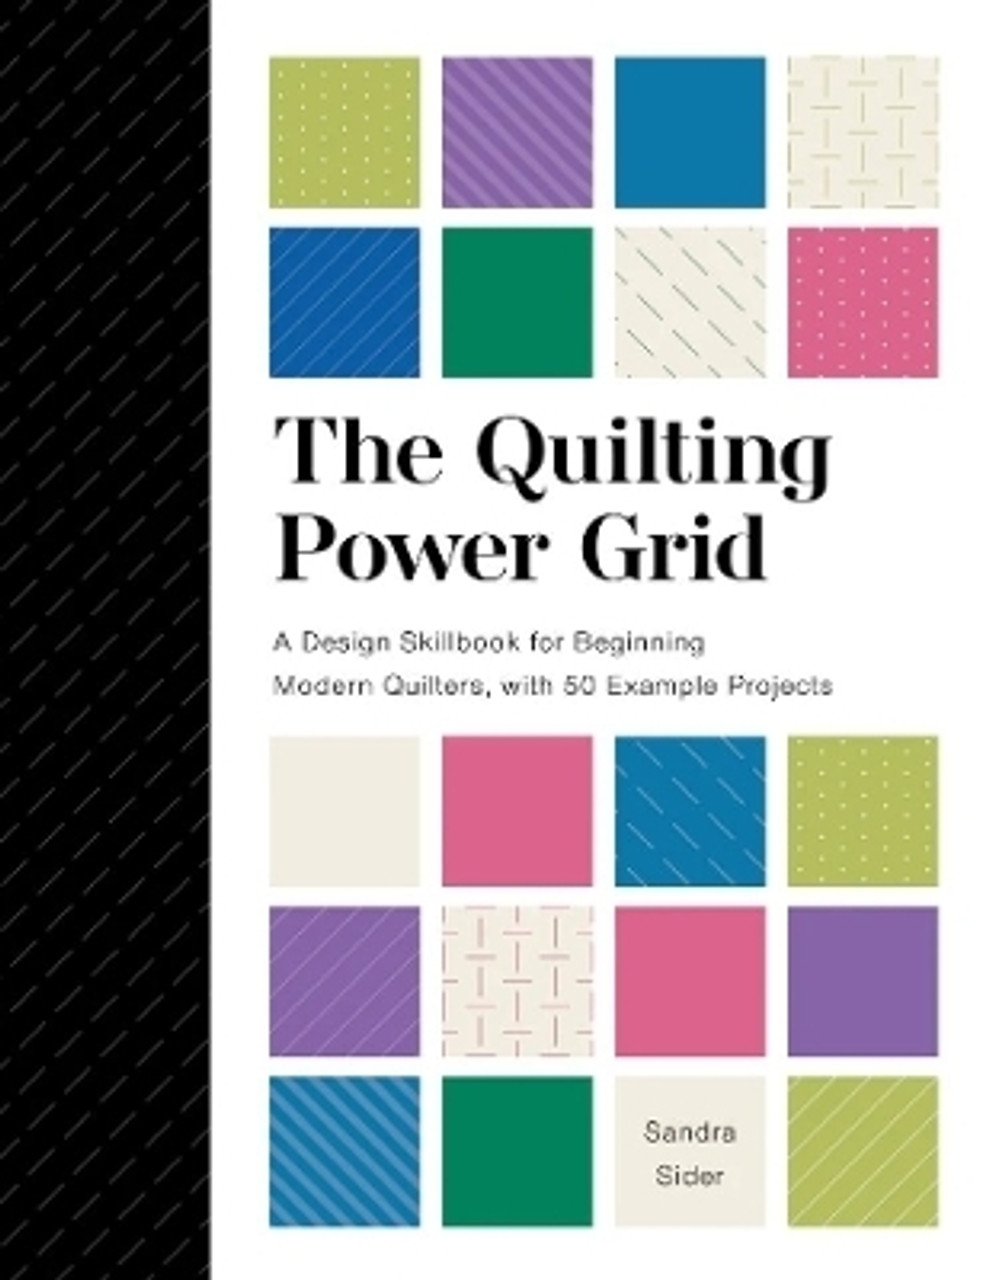 The Quilting Power Grid with 50 example projects by Sandra Sider